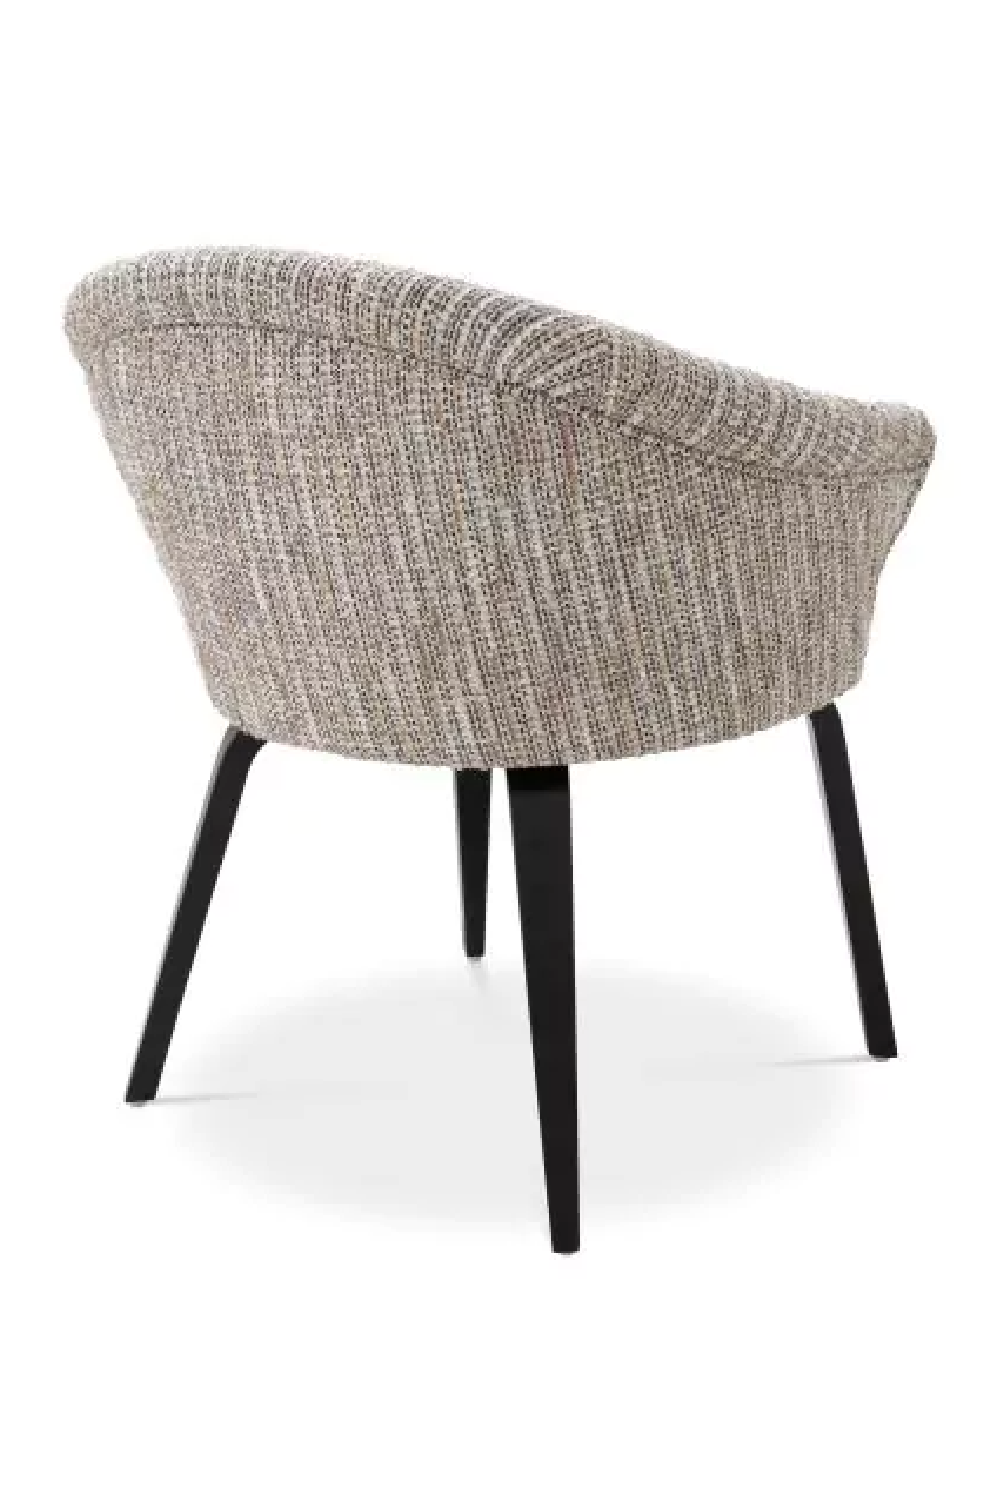 Upholstered Contemporary Dining Armchair | Eichholtz Moretti | Oroa.com